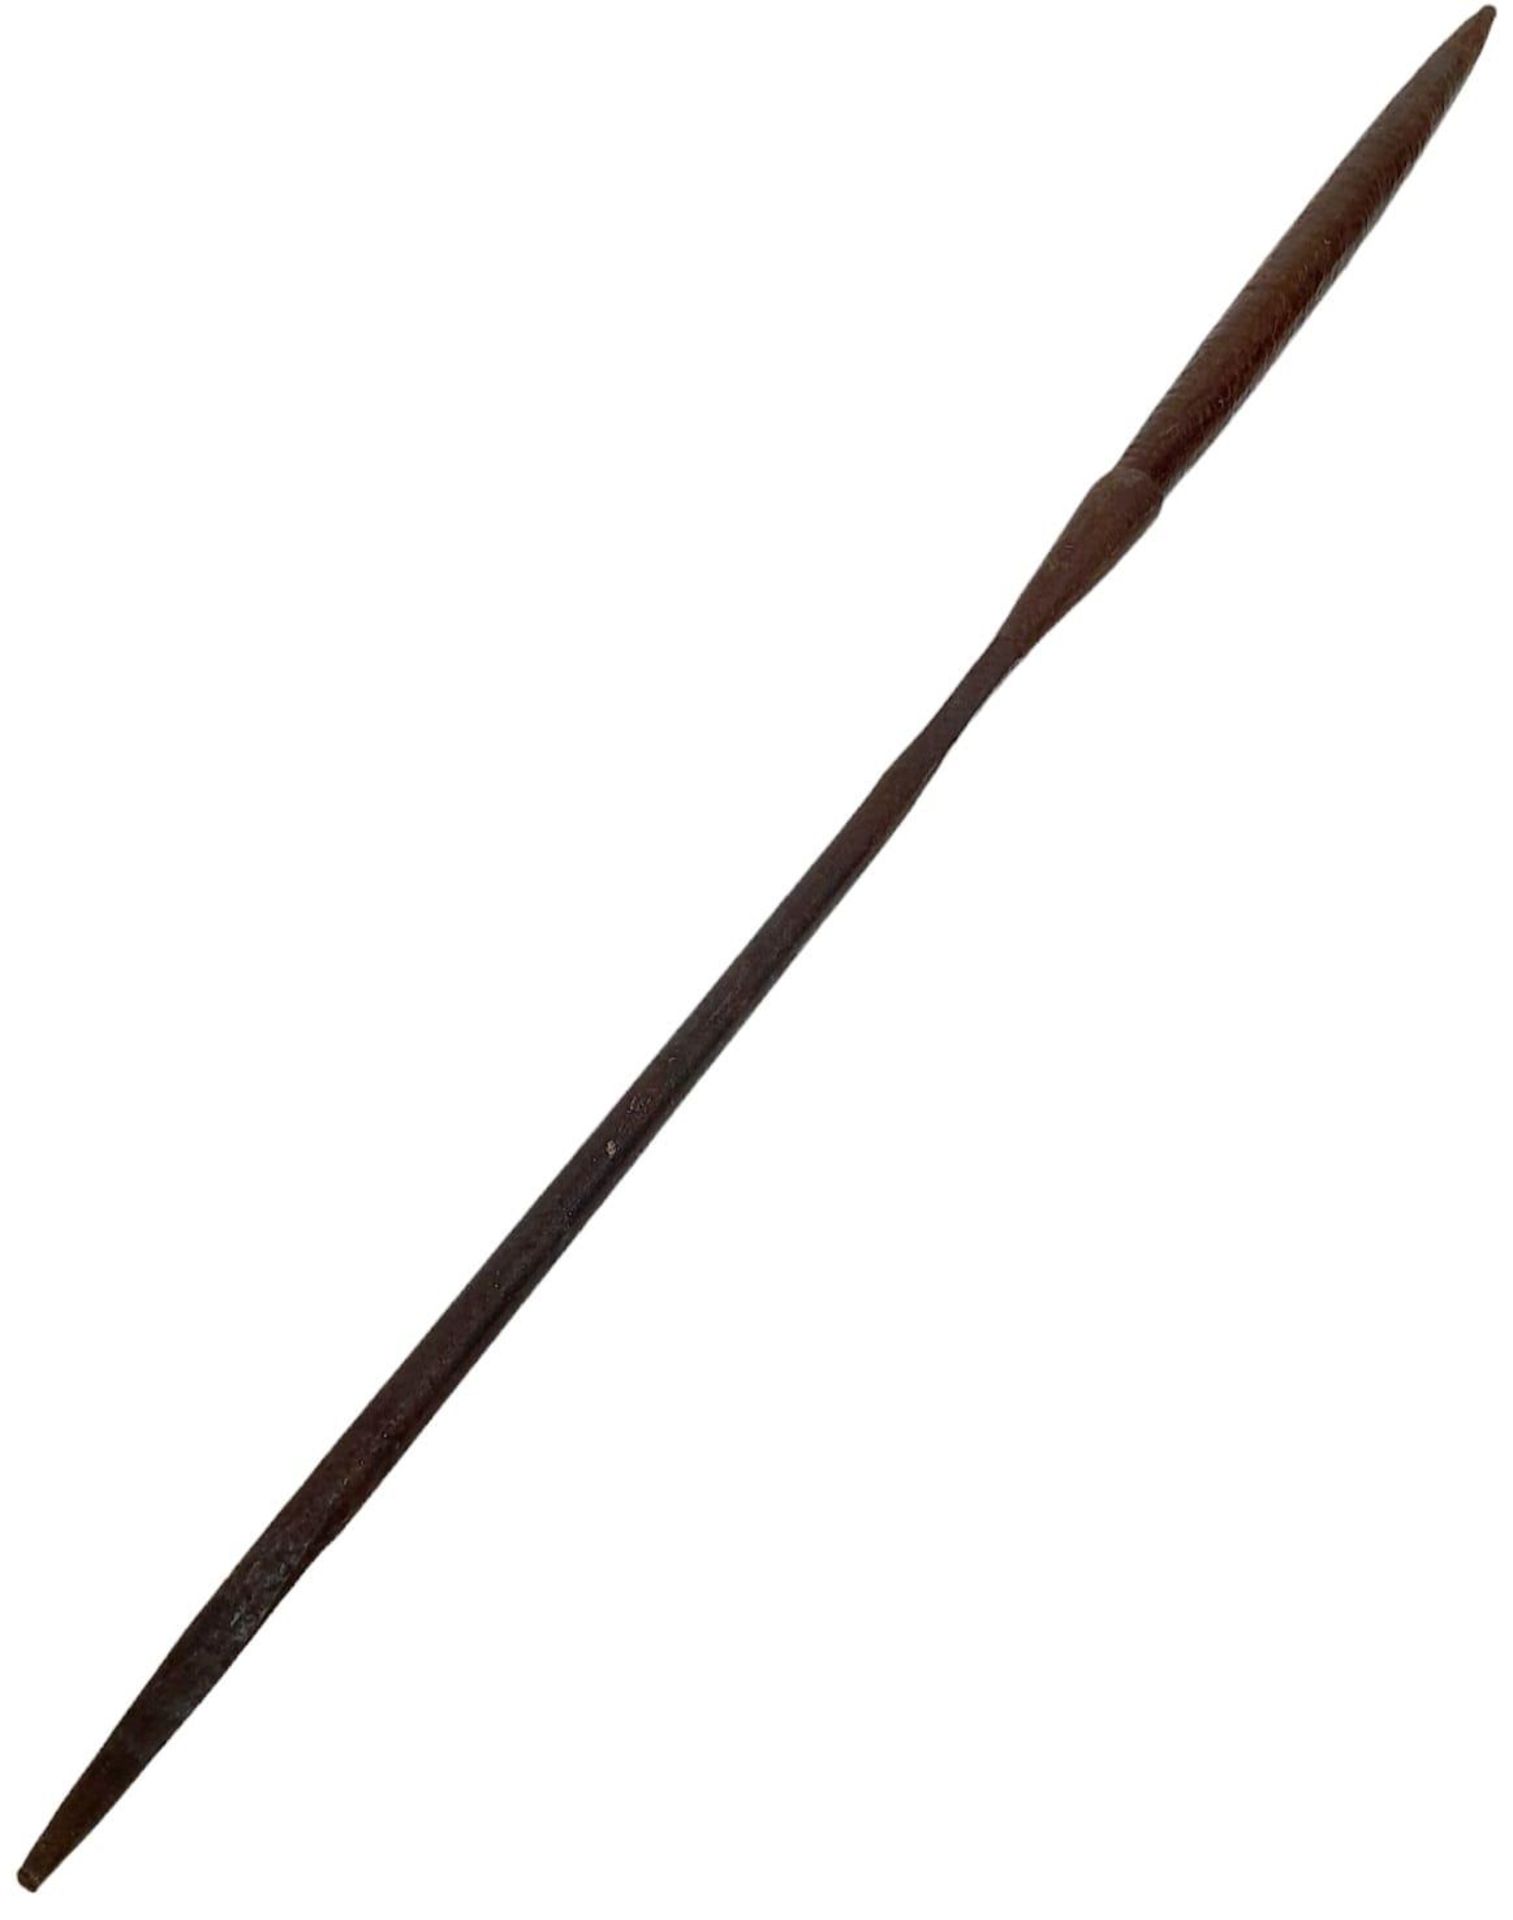 South African Short Stabbing Spear. 88cm Length - Image 3 of 4